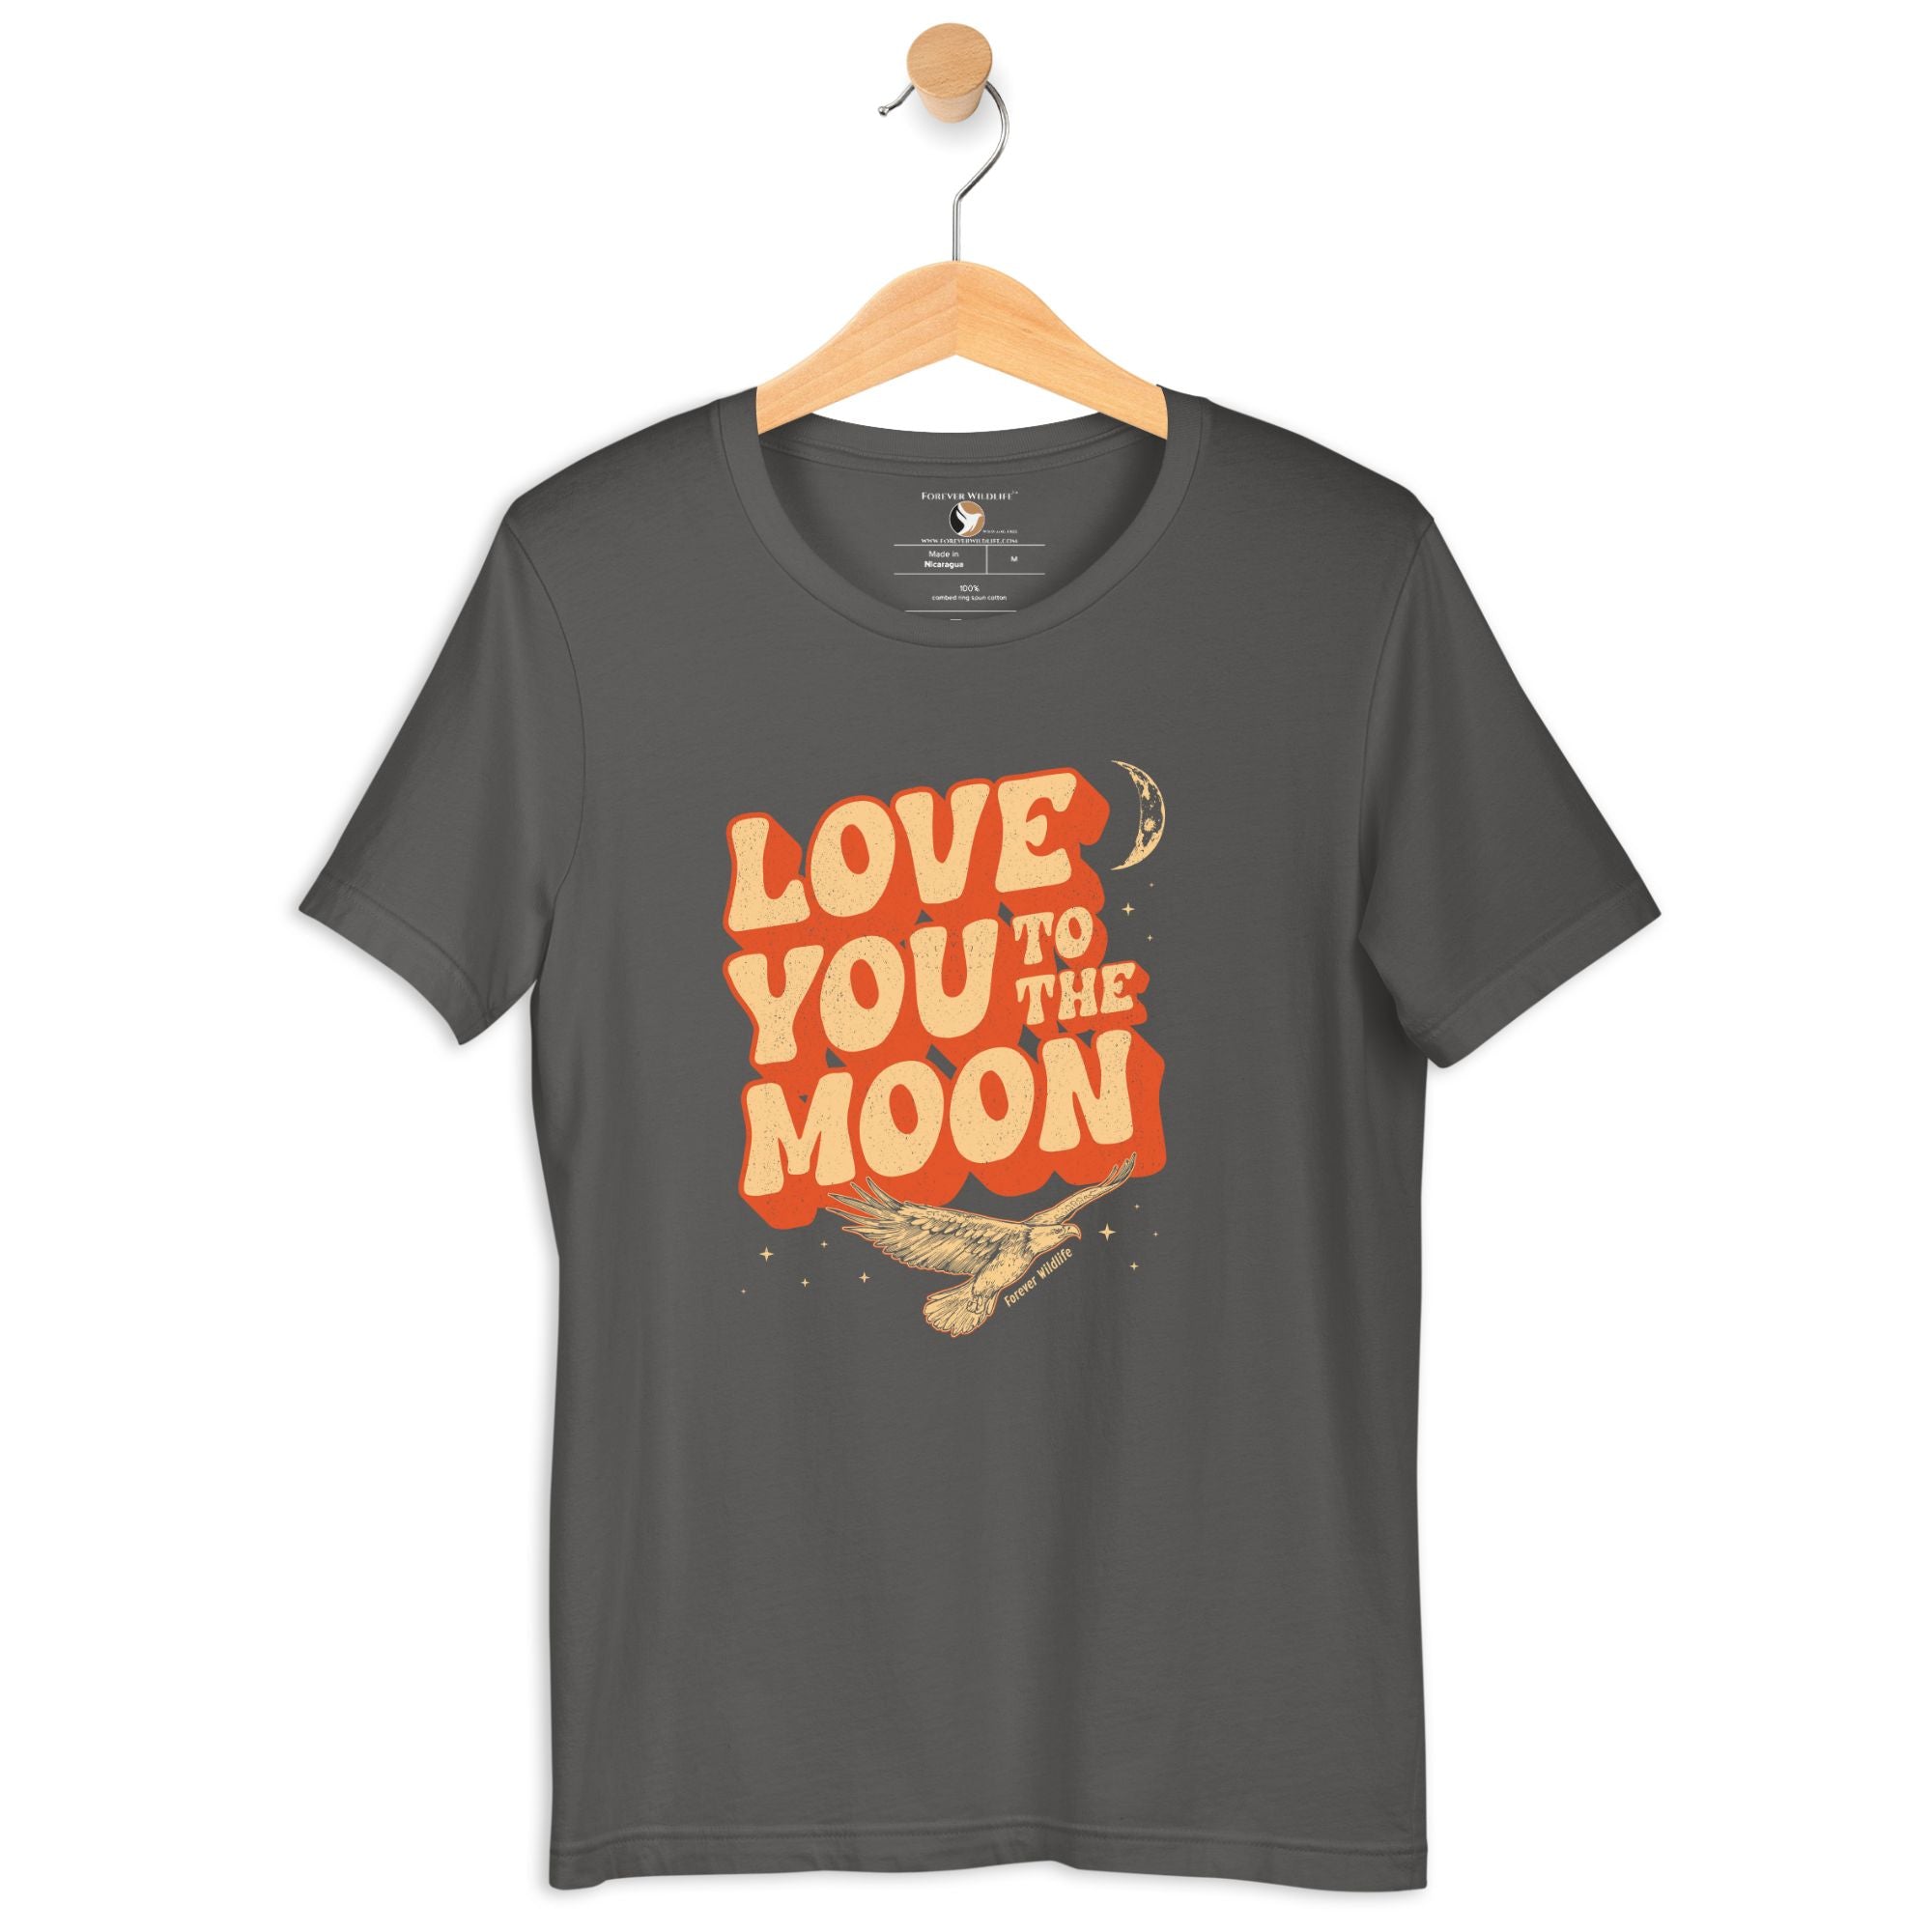 Eagle T-Shirt in Asphalt – Premium Wildlife T-Shirt Design with Love You To The Moon Text, Eagle Shirts and Wildlife Clothing